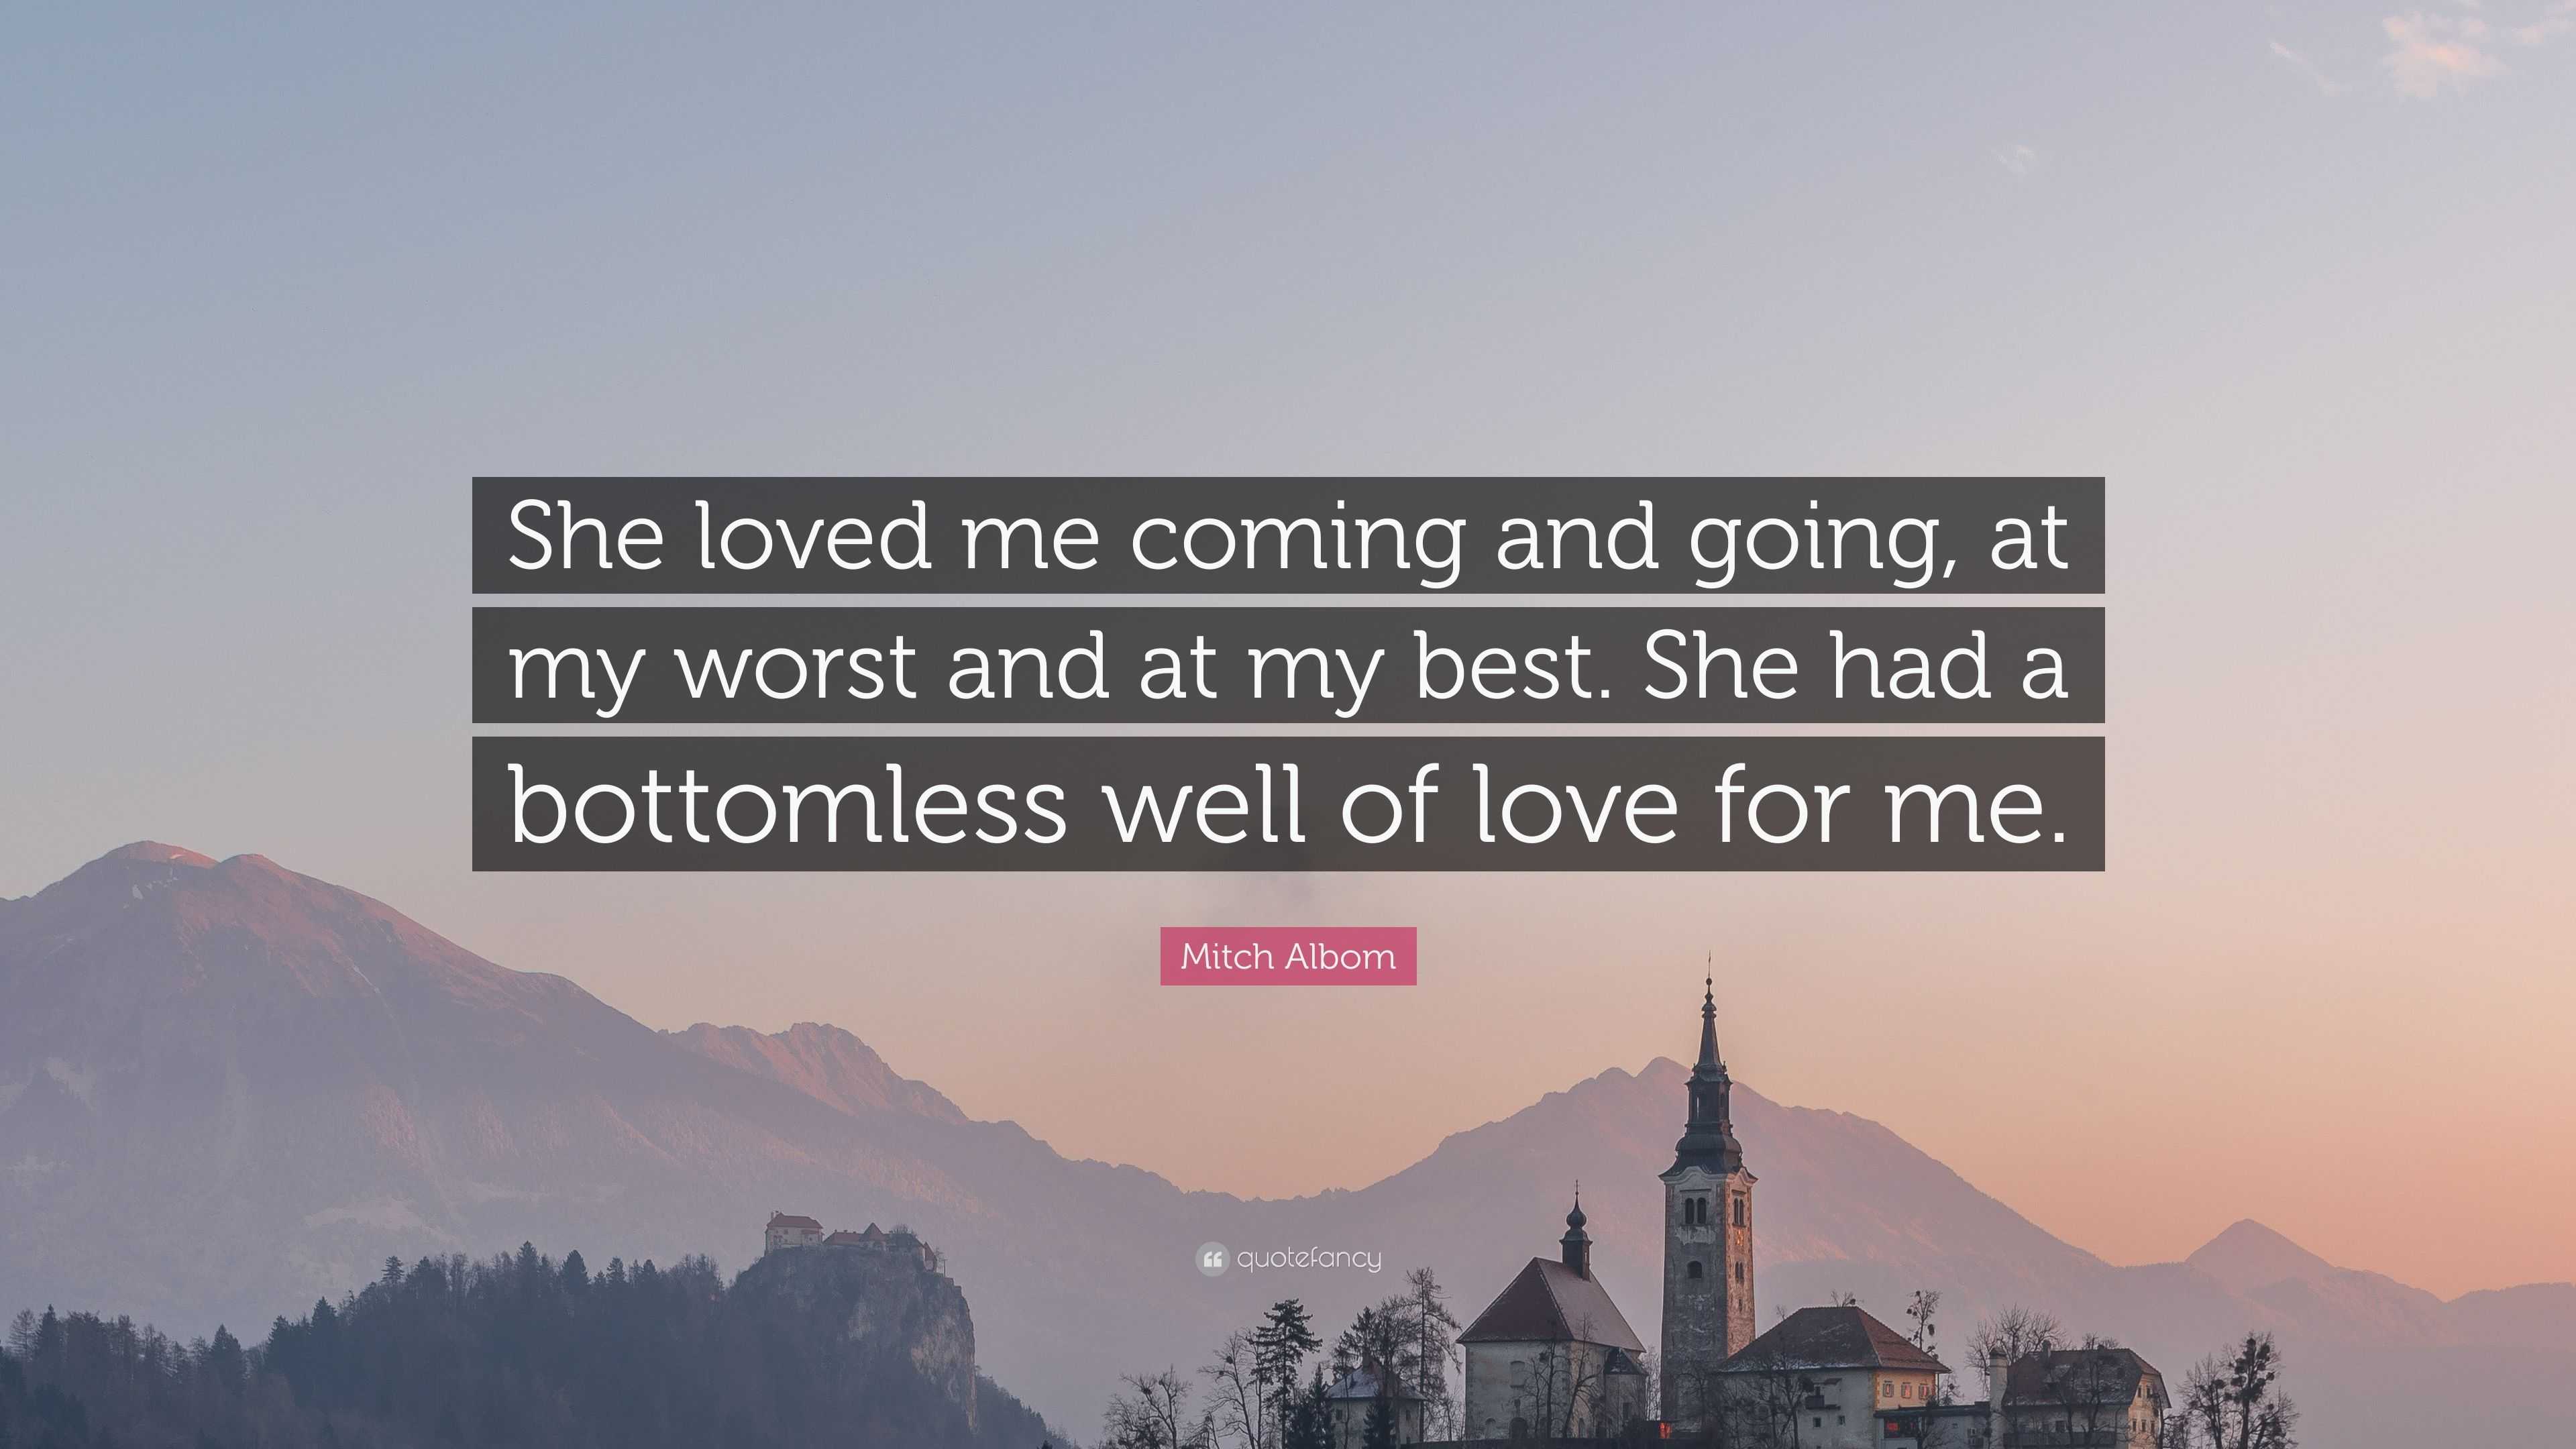 Mitch Albom Quote “She loved me ing and going at my worst and